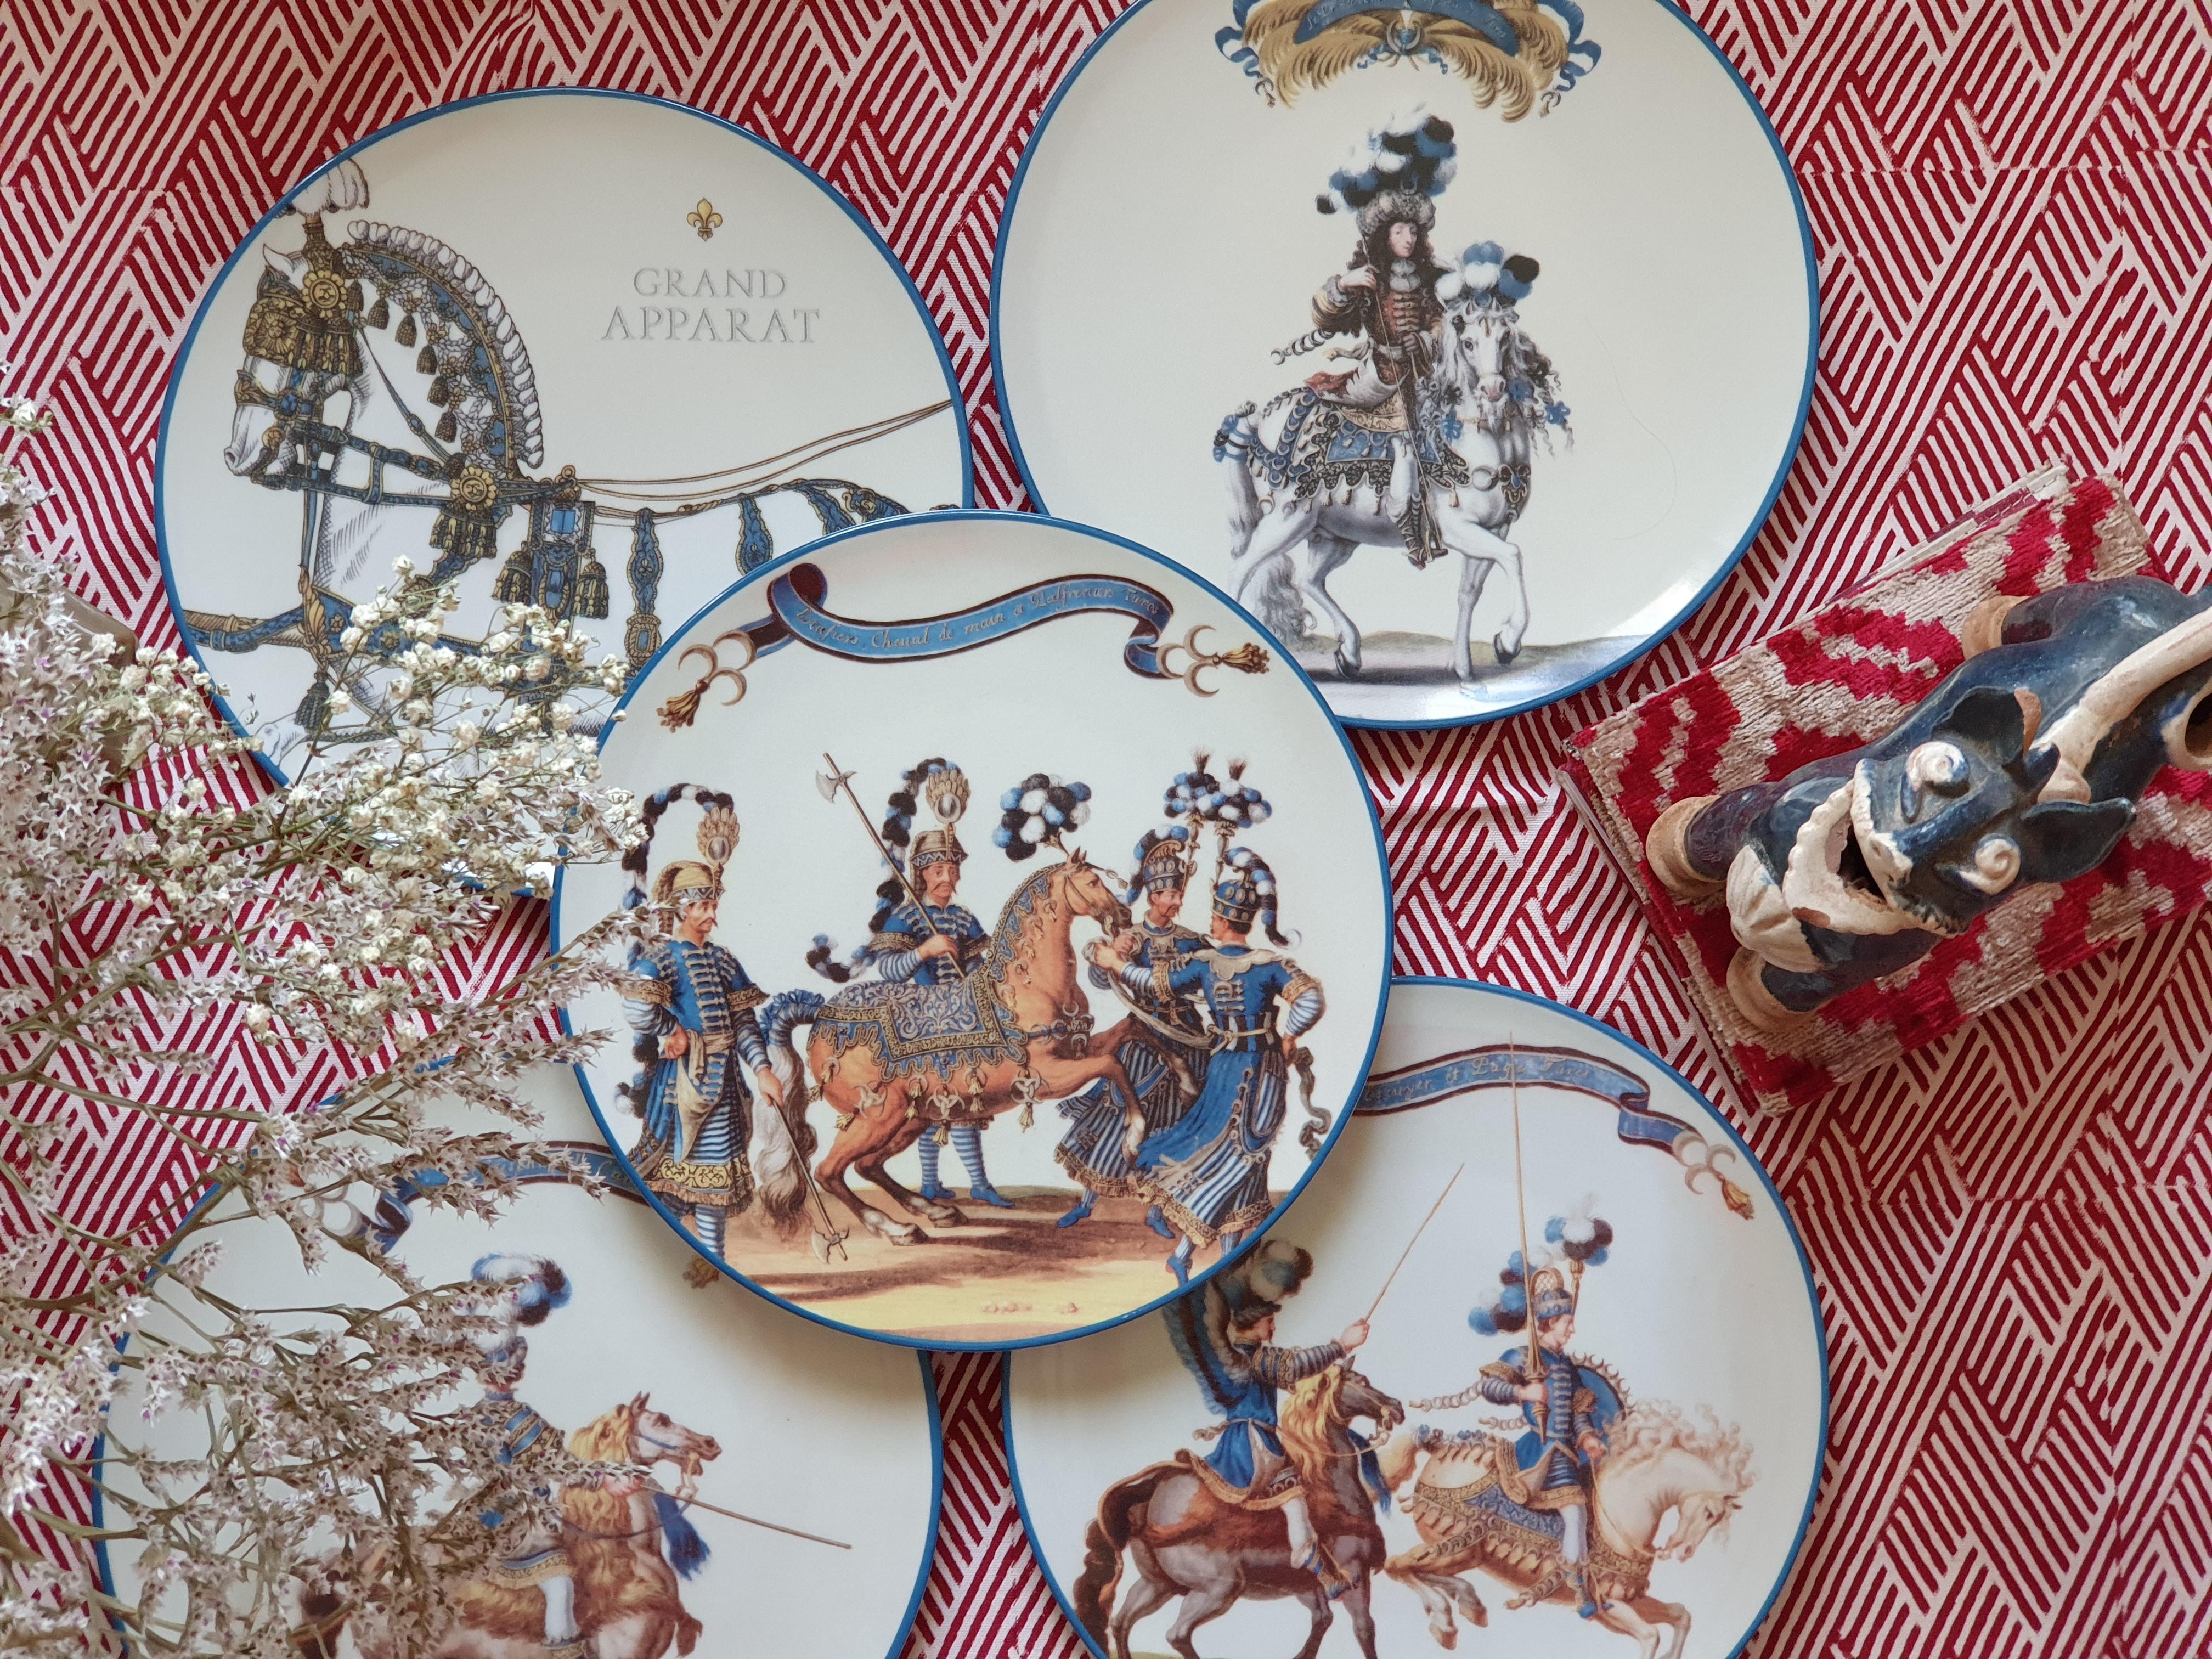 Baroque Revival Le Carousel Porcelain Plate, Made in Italy For Sale